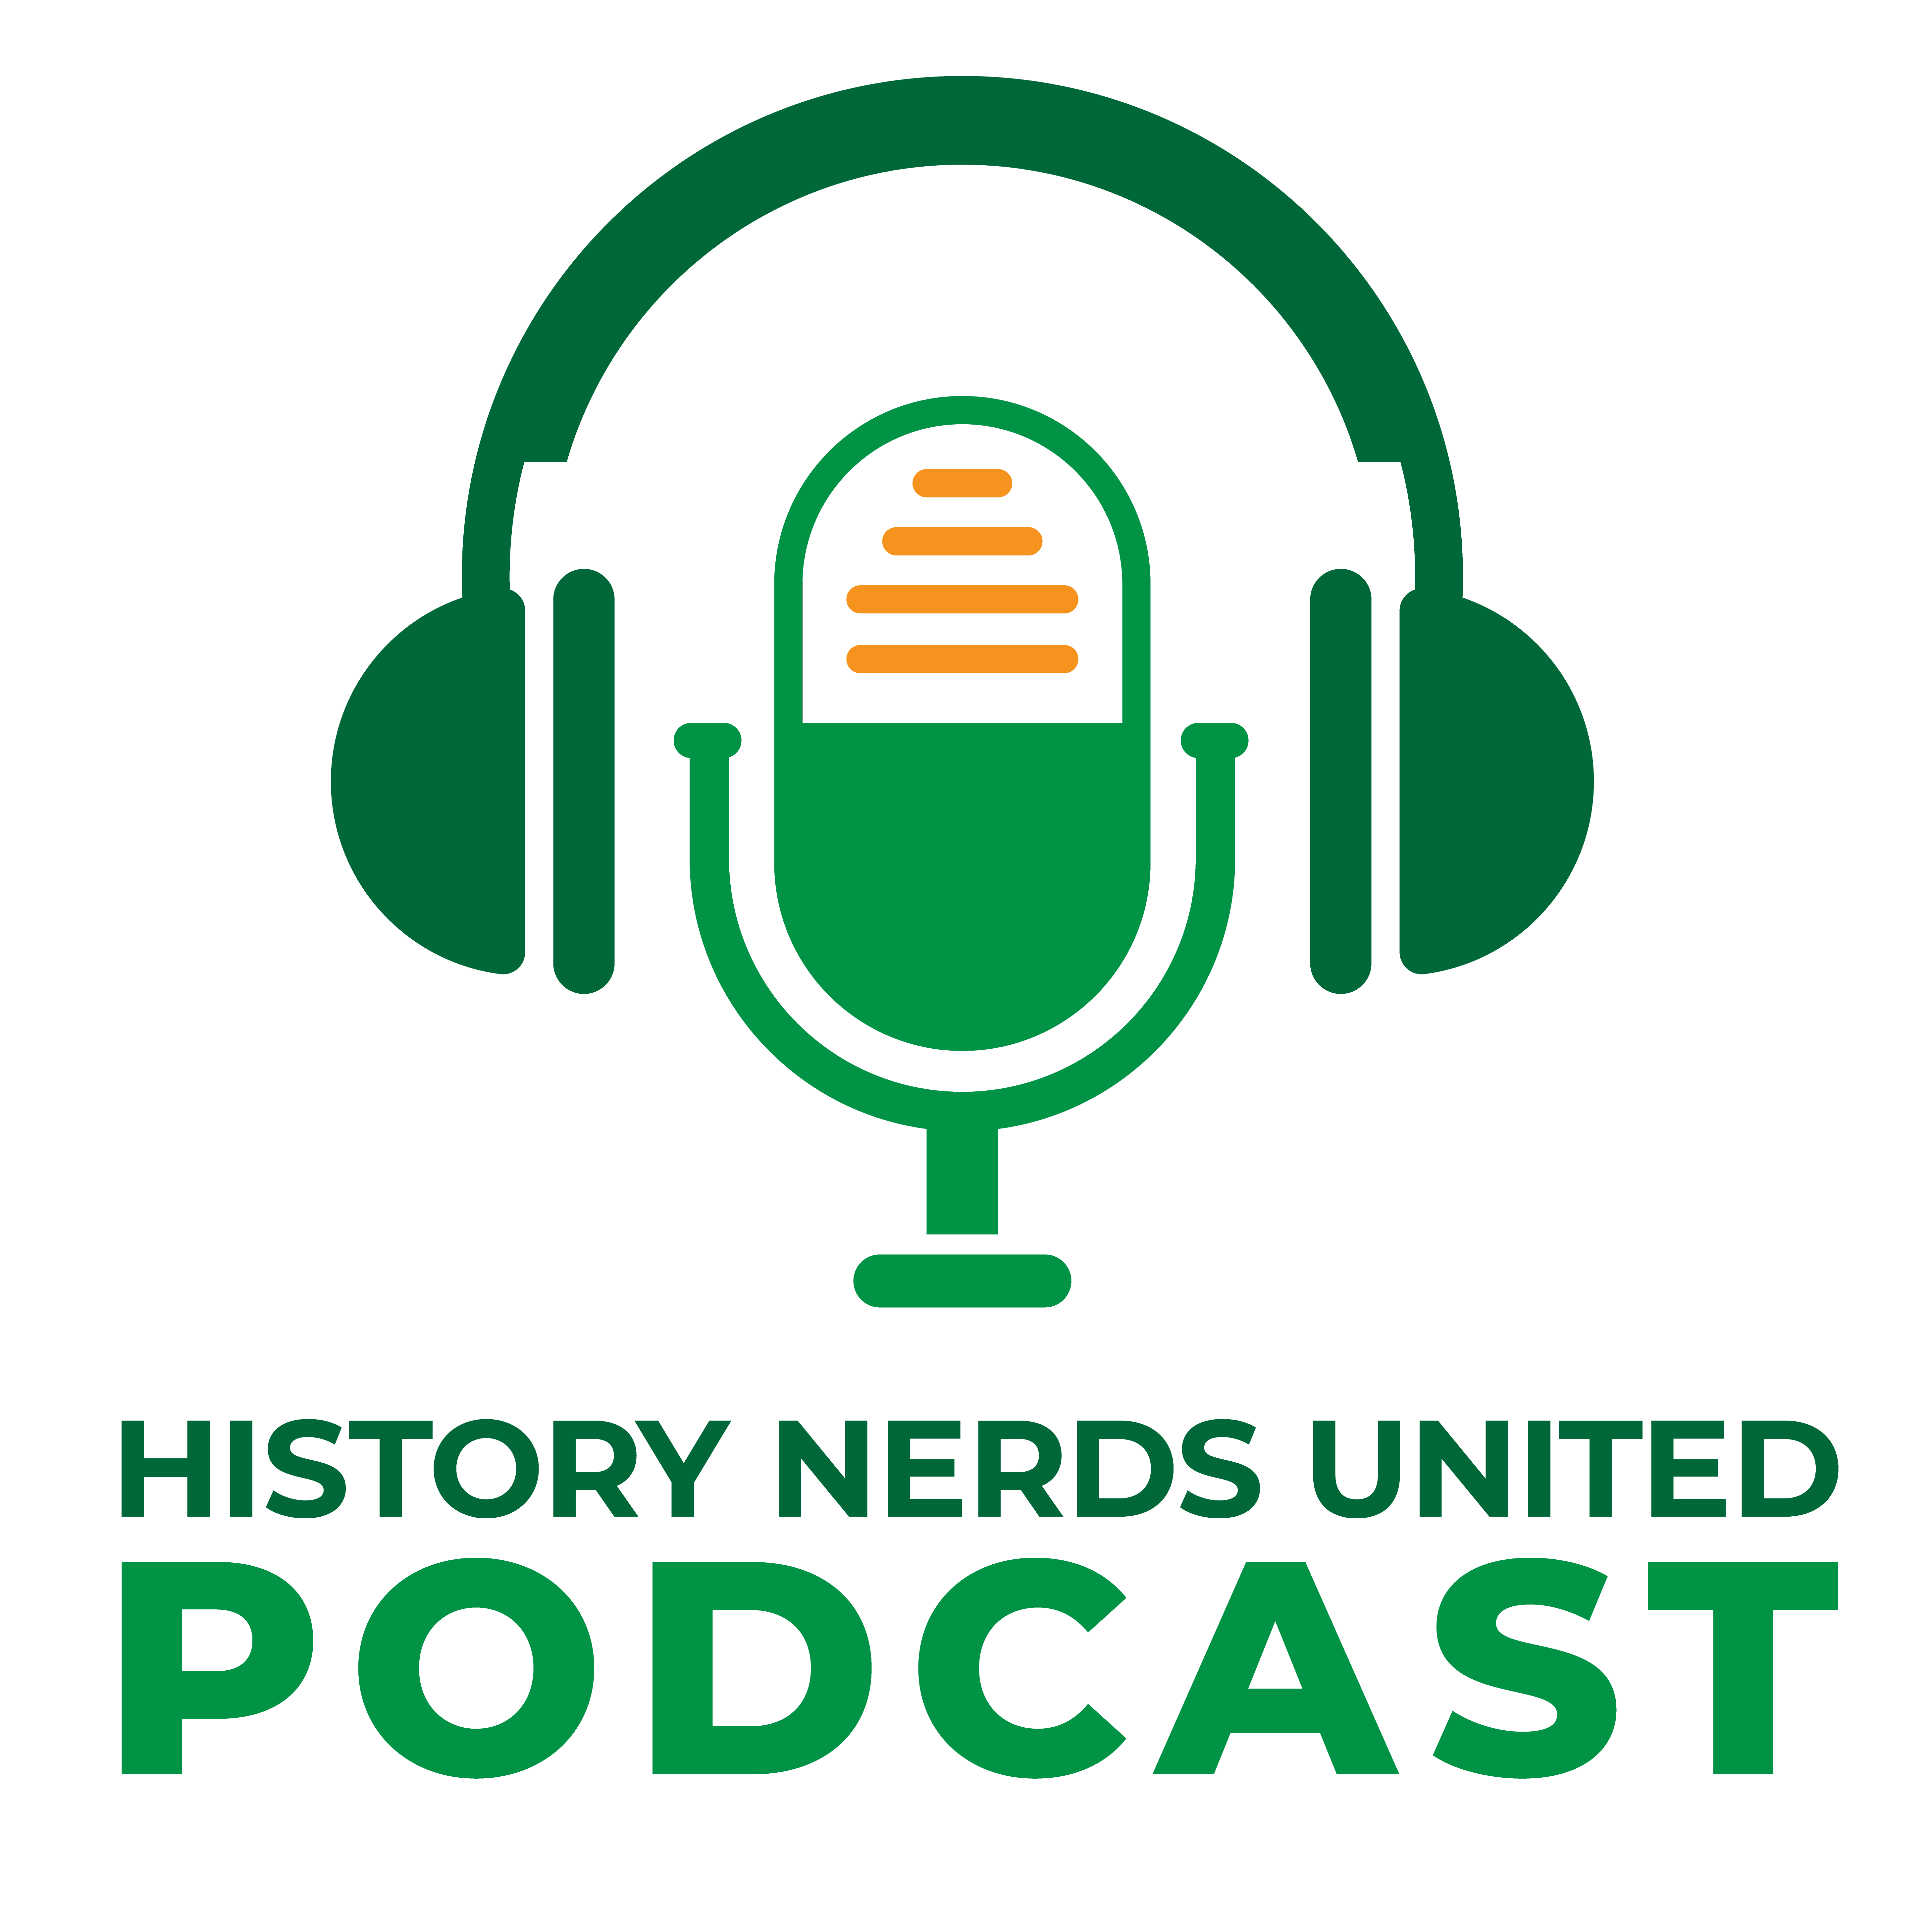 History Nerds United Podcast Episode 1 is Available!